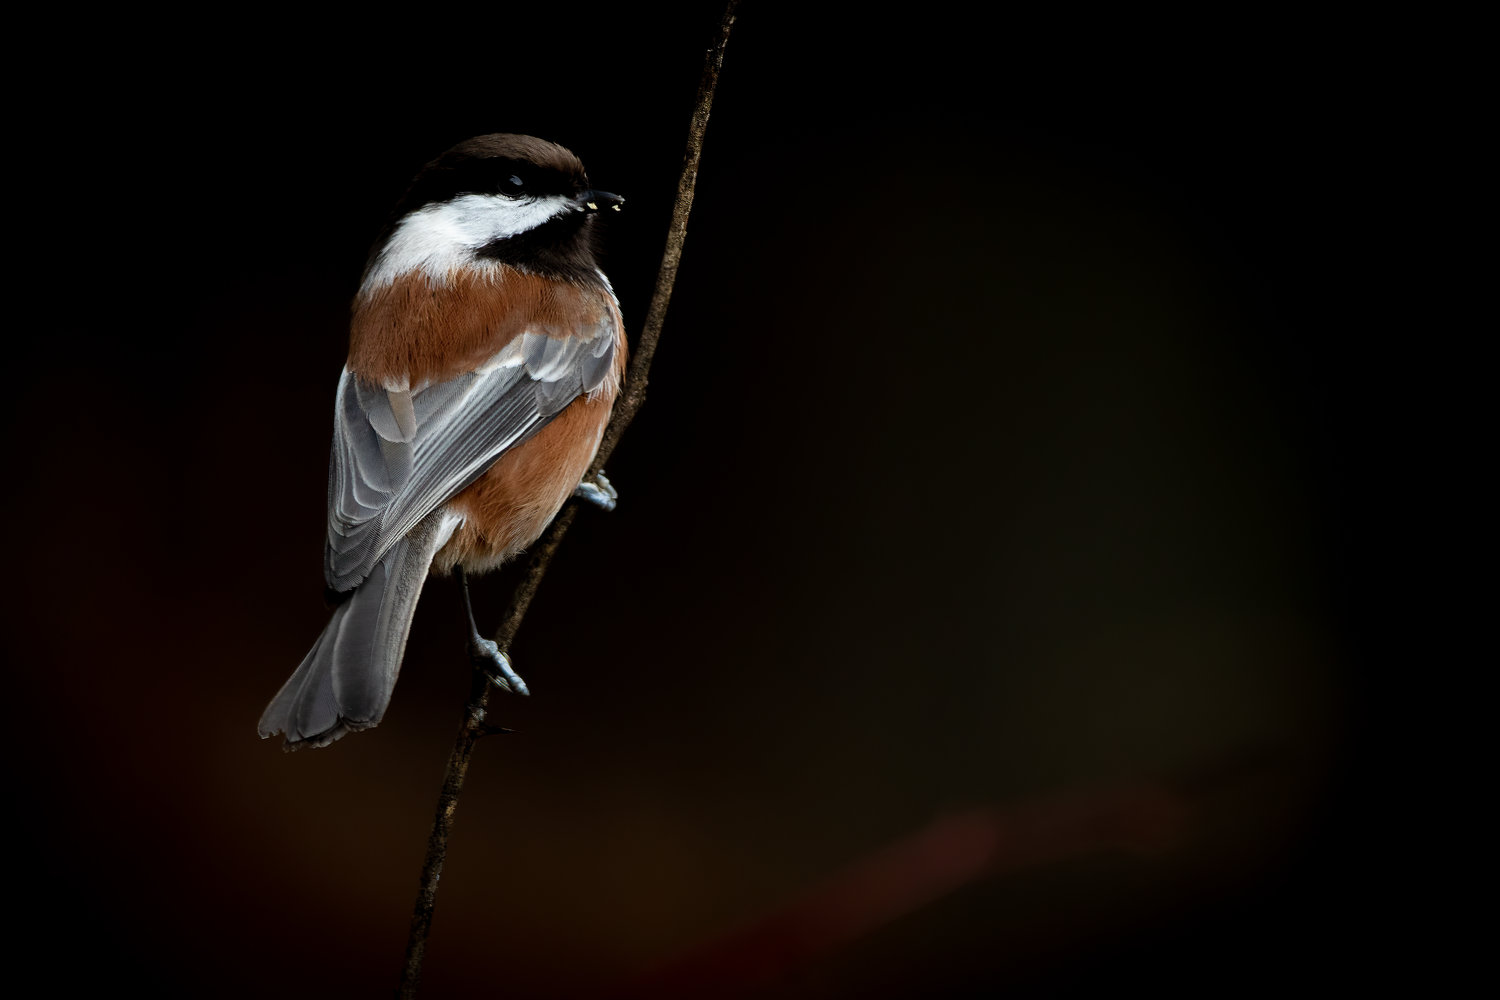 This is the Chestnut-backed Chickadee.